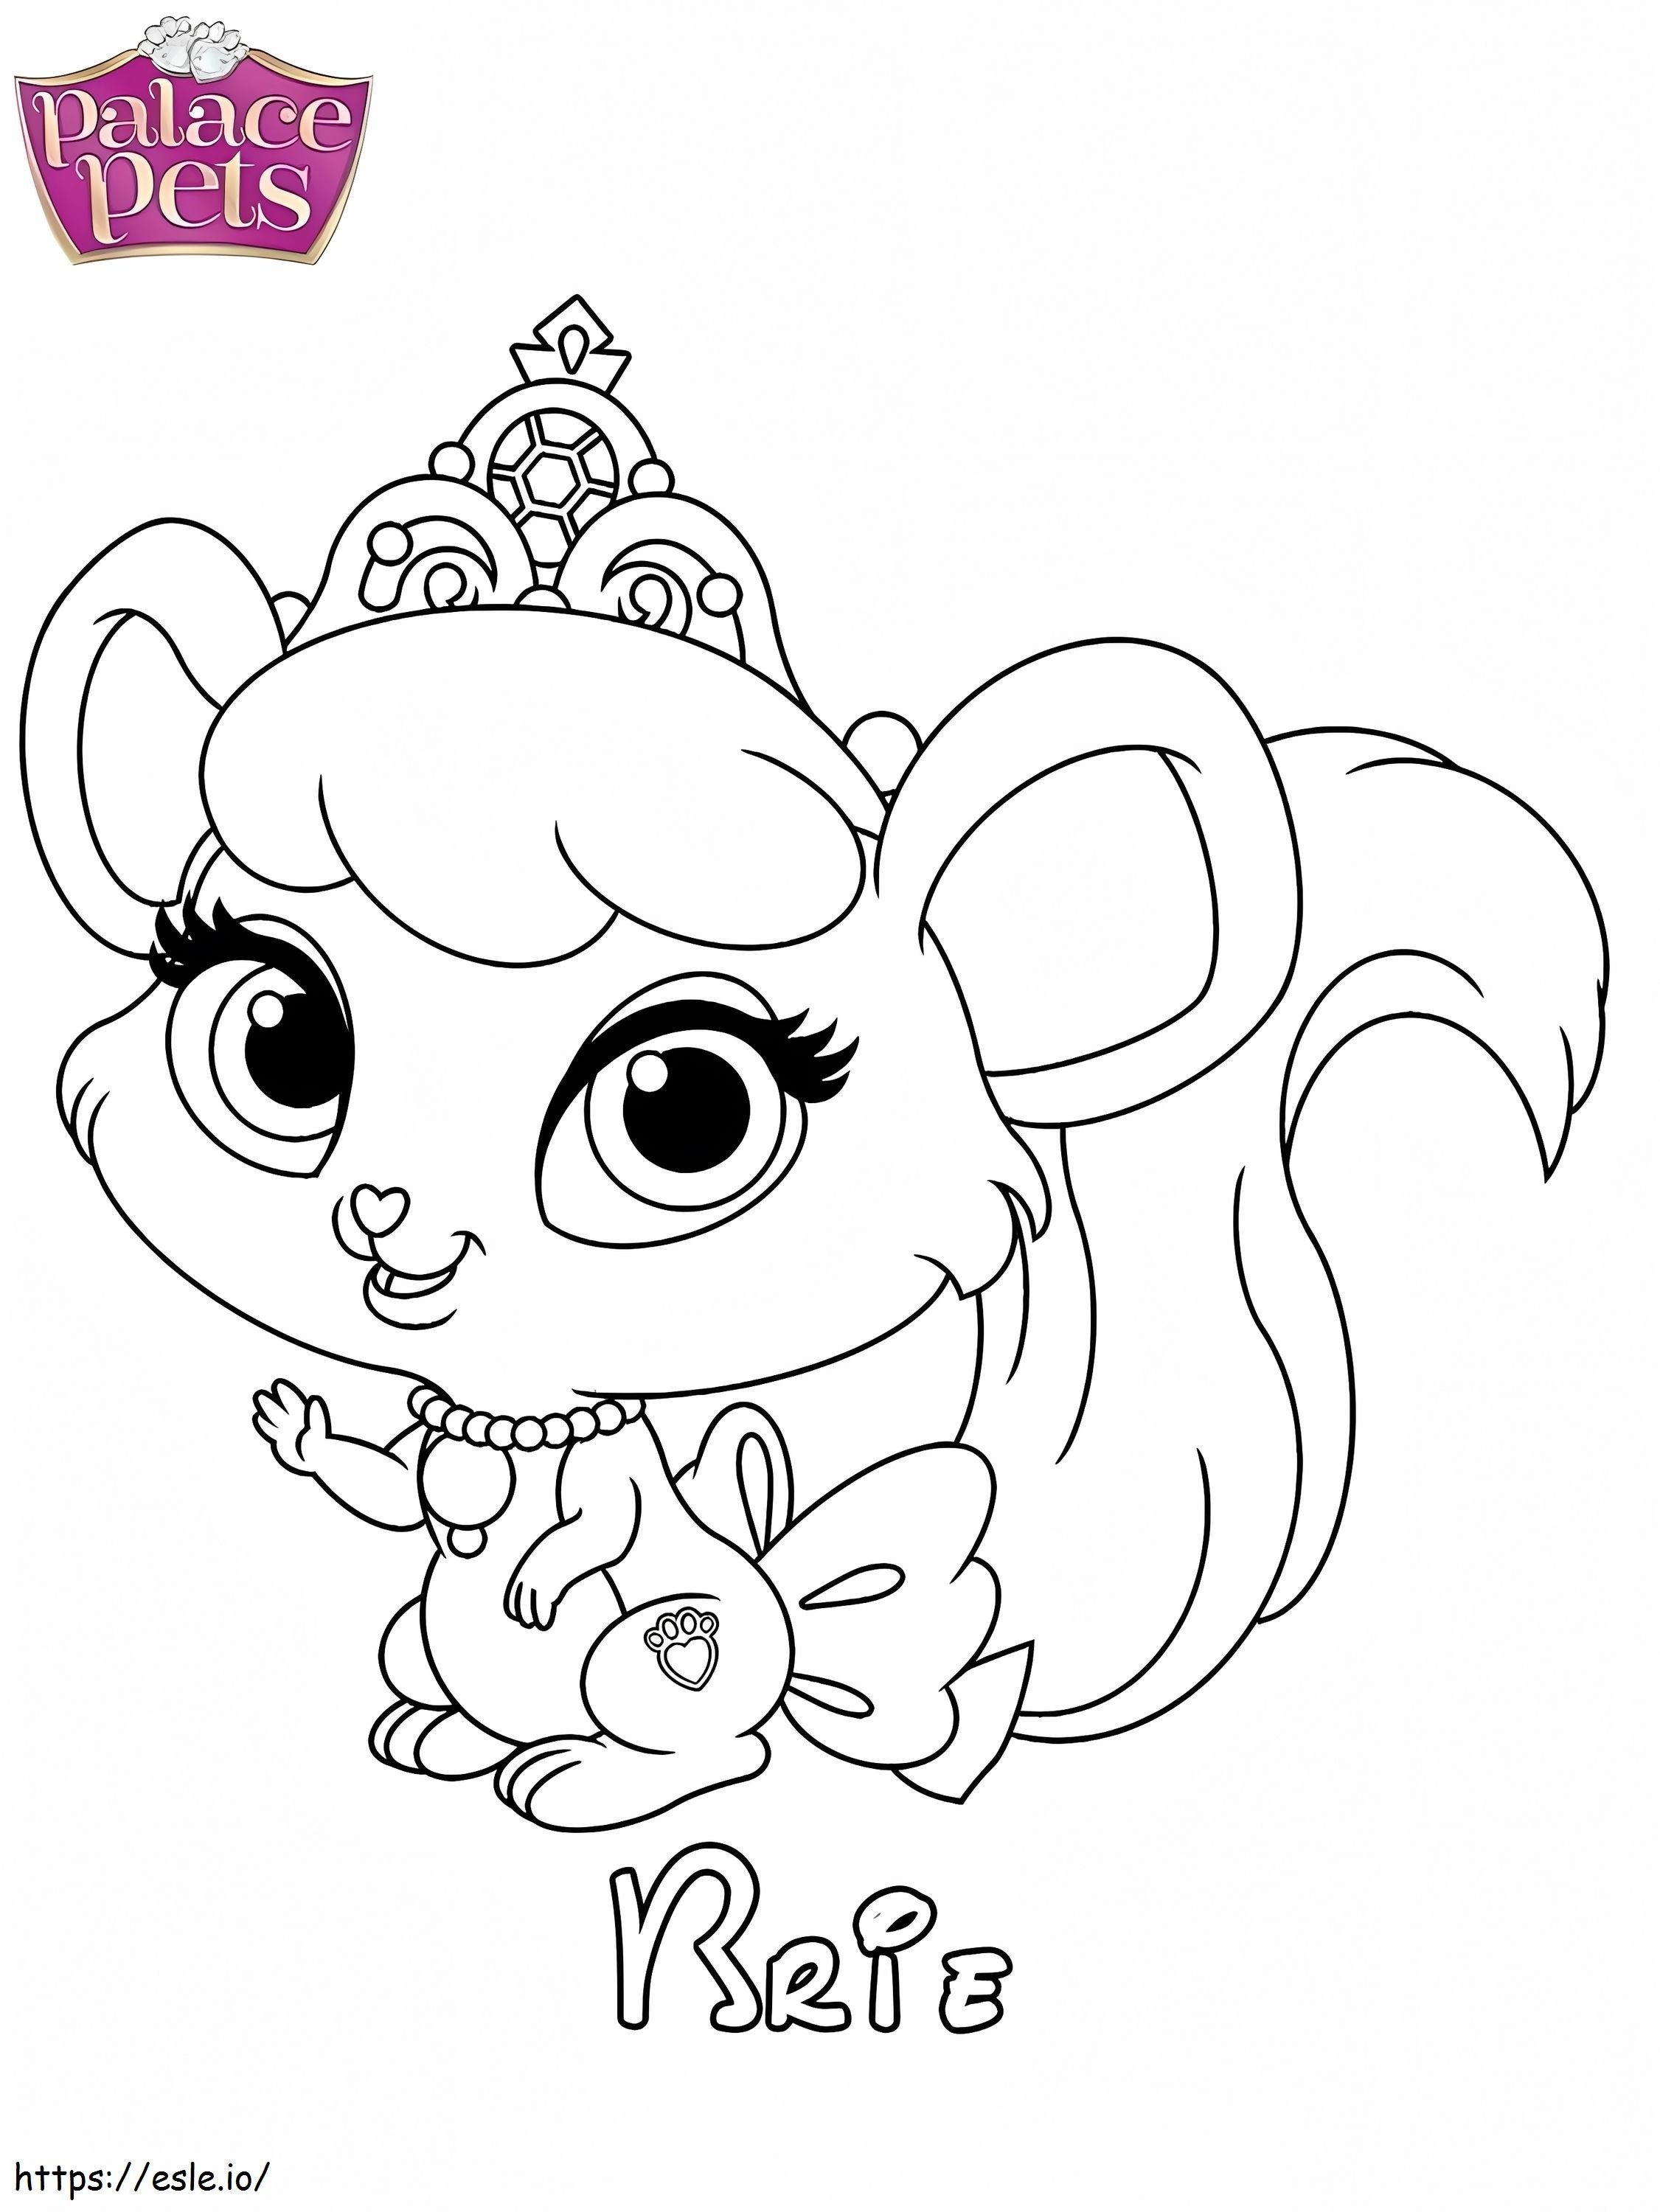 Brie Princess coloring page